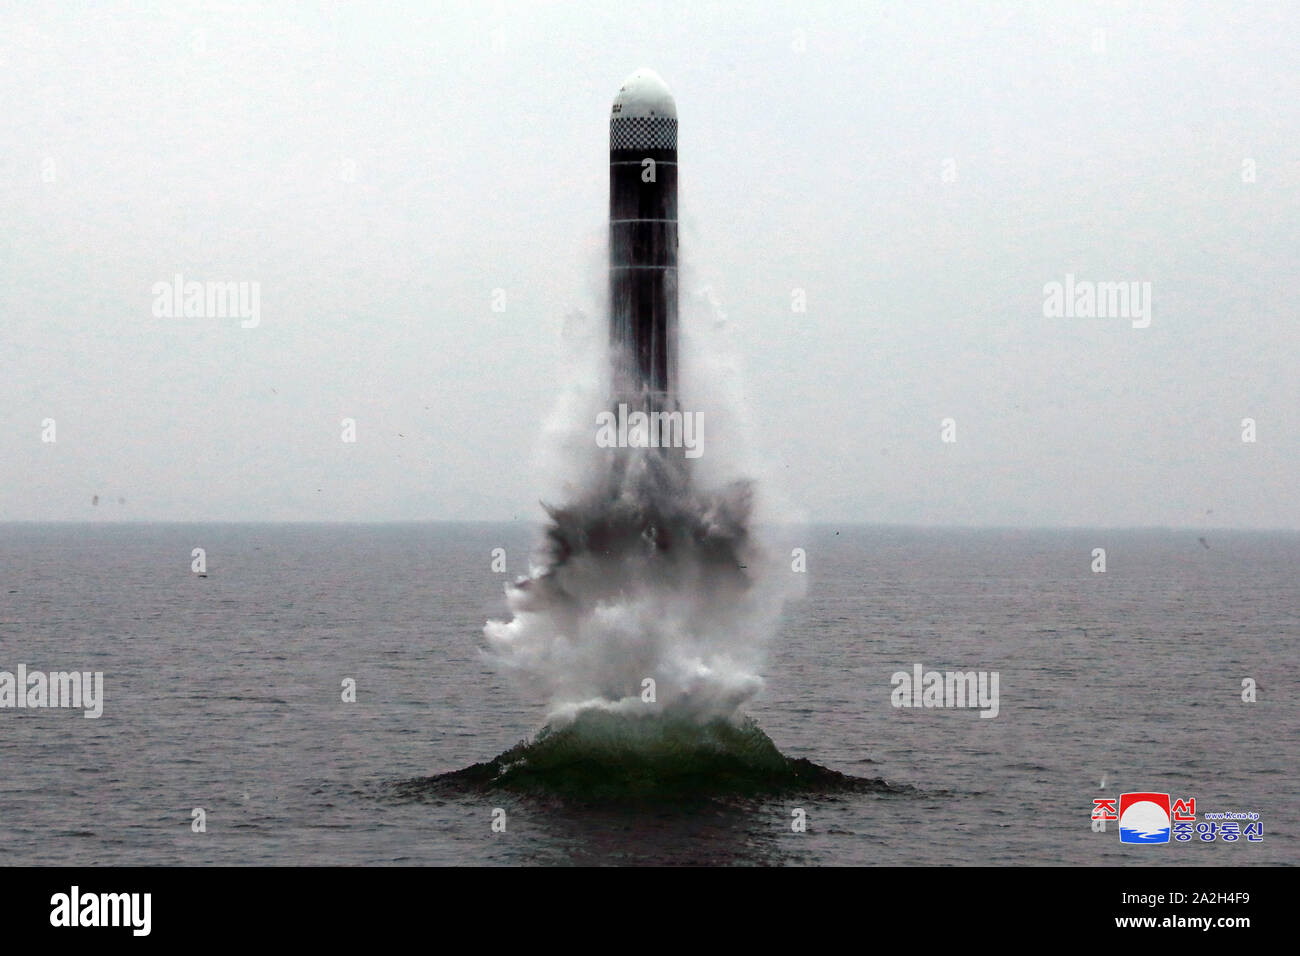 Wonsan Bay, DPRK. 3rd October, 2019. (Photo provided by Korean Central News Agency (KCNA) on Oct. 3, 2019 shows the test-firing of the new-type ballistic missile, known as Pukguksong-3, in vertical mode in the waters off the Democratic People's Republic of Korea (DPRK)'s eastern Wonsan Bay. The DPRK succeeded in test-firing a new type of submarine-launched ballistic missile (SLBM) on Wednesday morning, the official Korean Central News Agency reported on Thursday. (KCNA/Handout via Xinhua) Credit: Xinhua/Alamy Live News Stock Photo